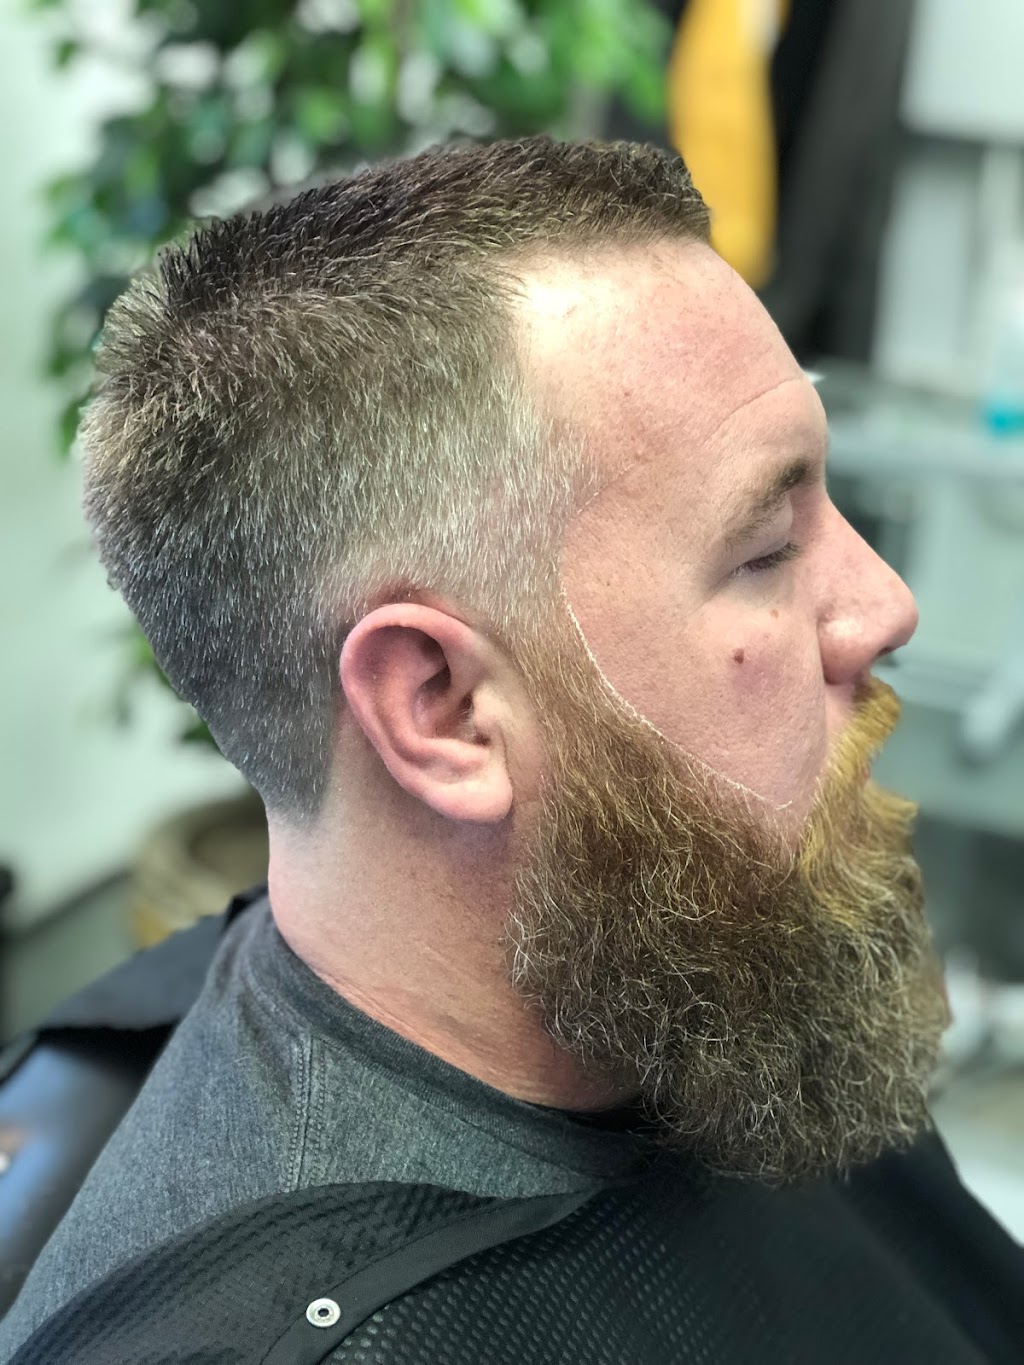 Maple Alley Barbers | 537 Maple Alley, West Chester, PA 19380 | Phone: (484) 887-8475